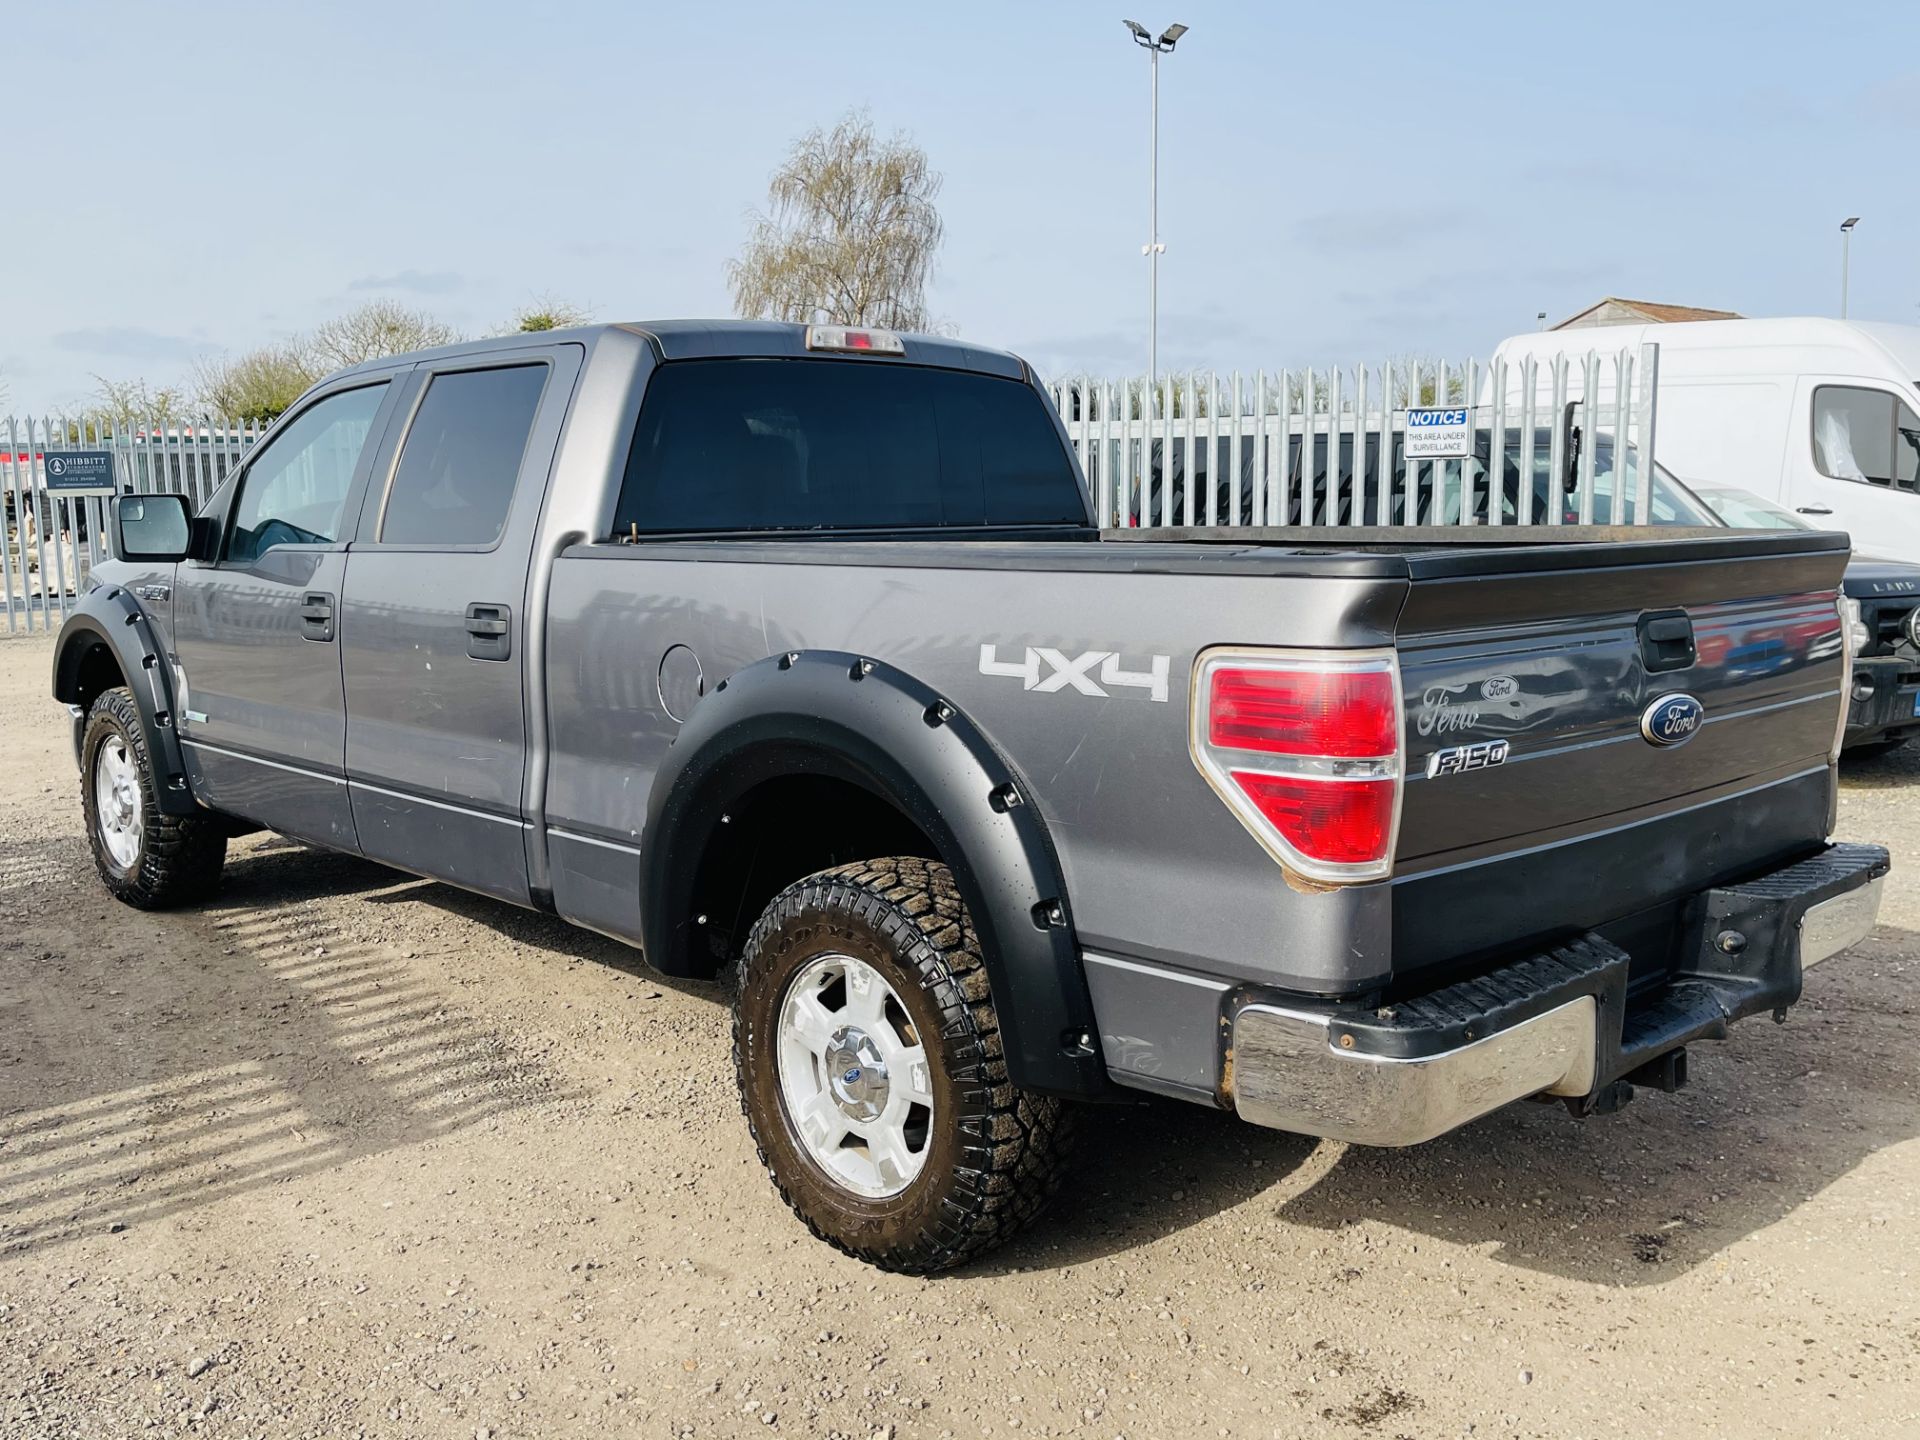 ** ON SALE **Ford F-150 XLT Edition 3.5L V6 Eco-boost Super-Crew 4x4 - '2012 Year' - Air Con - - Image 8 of 28